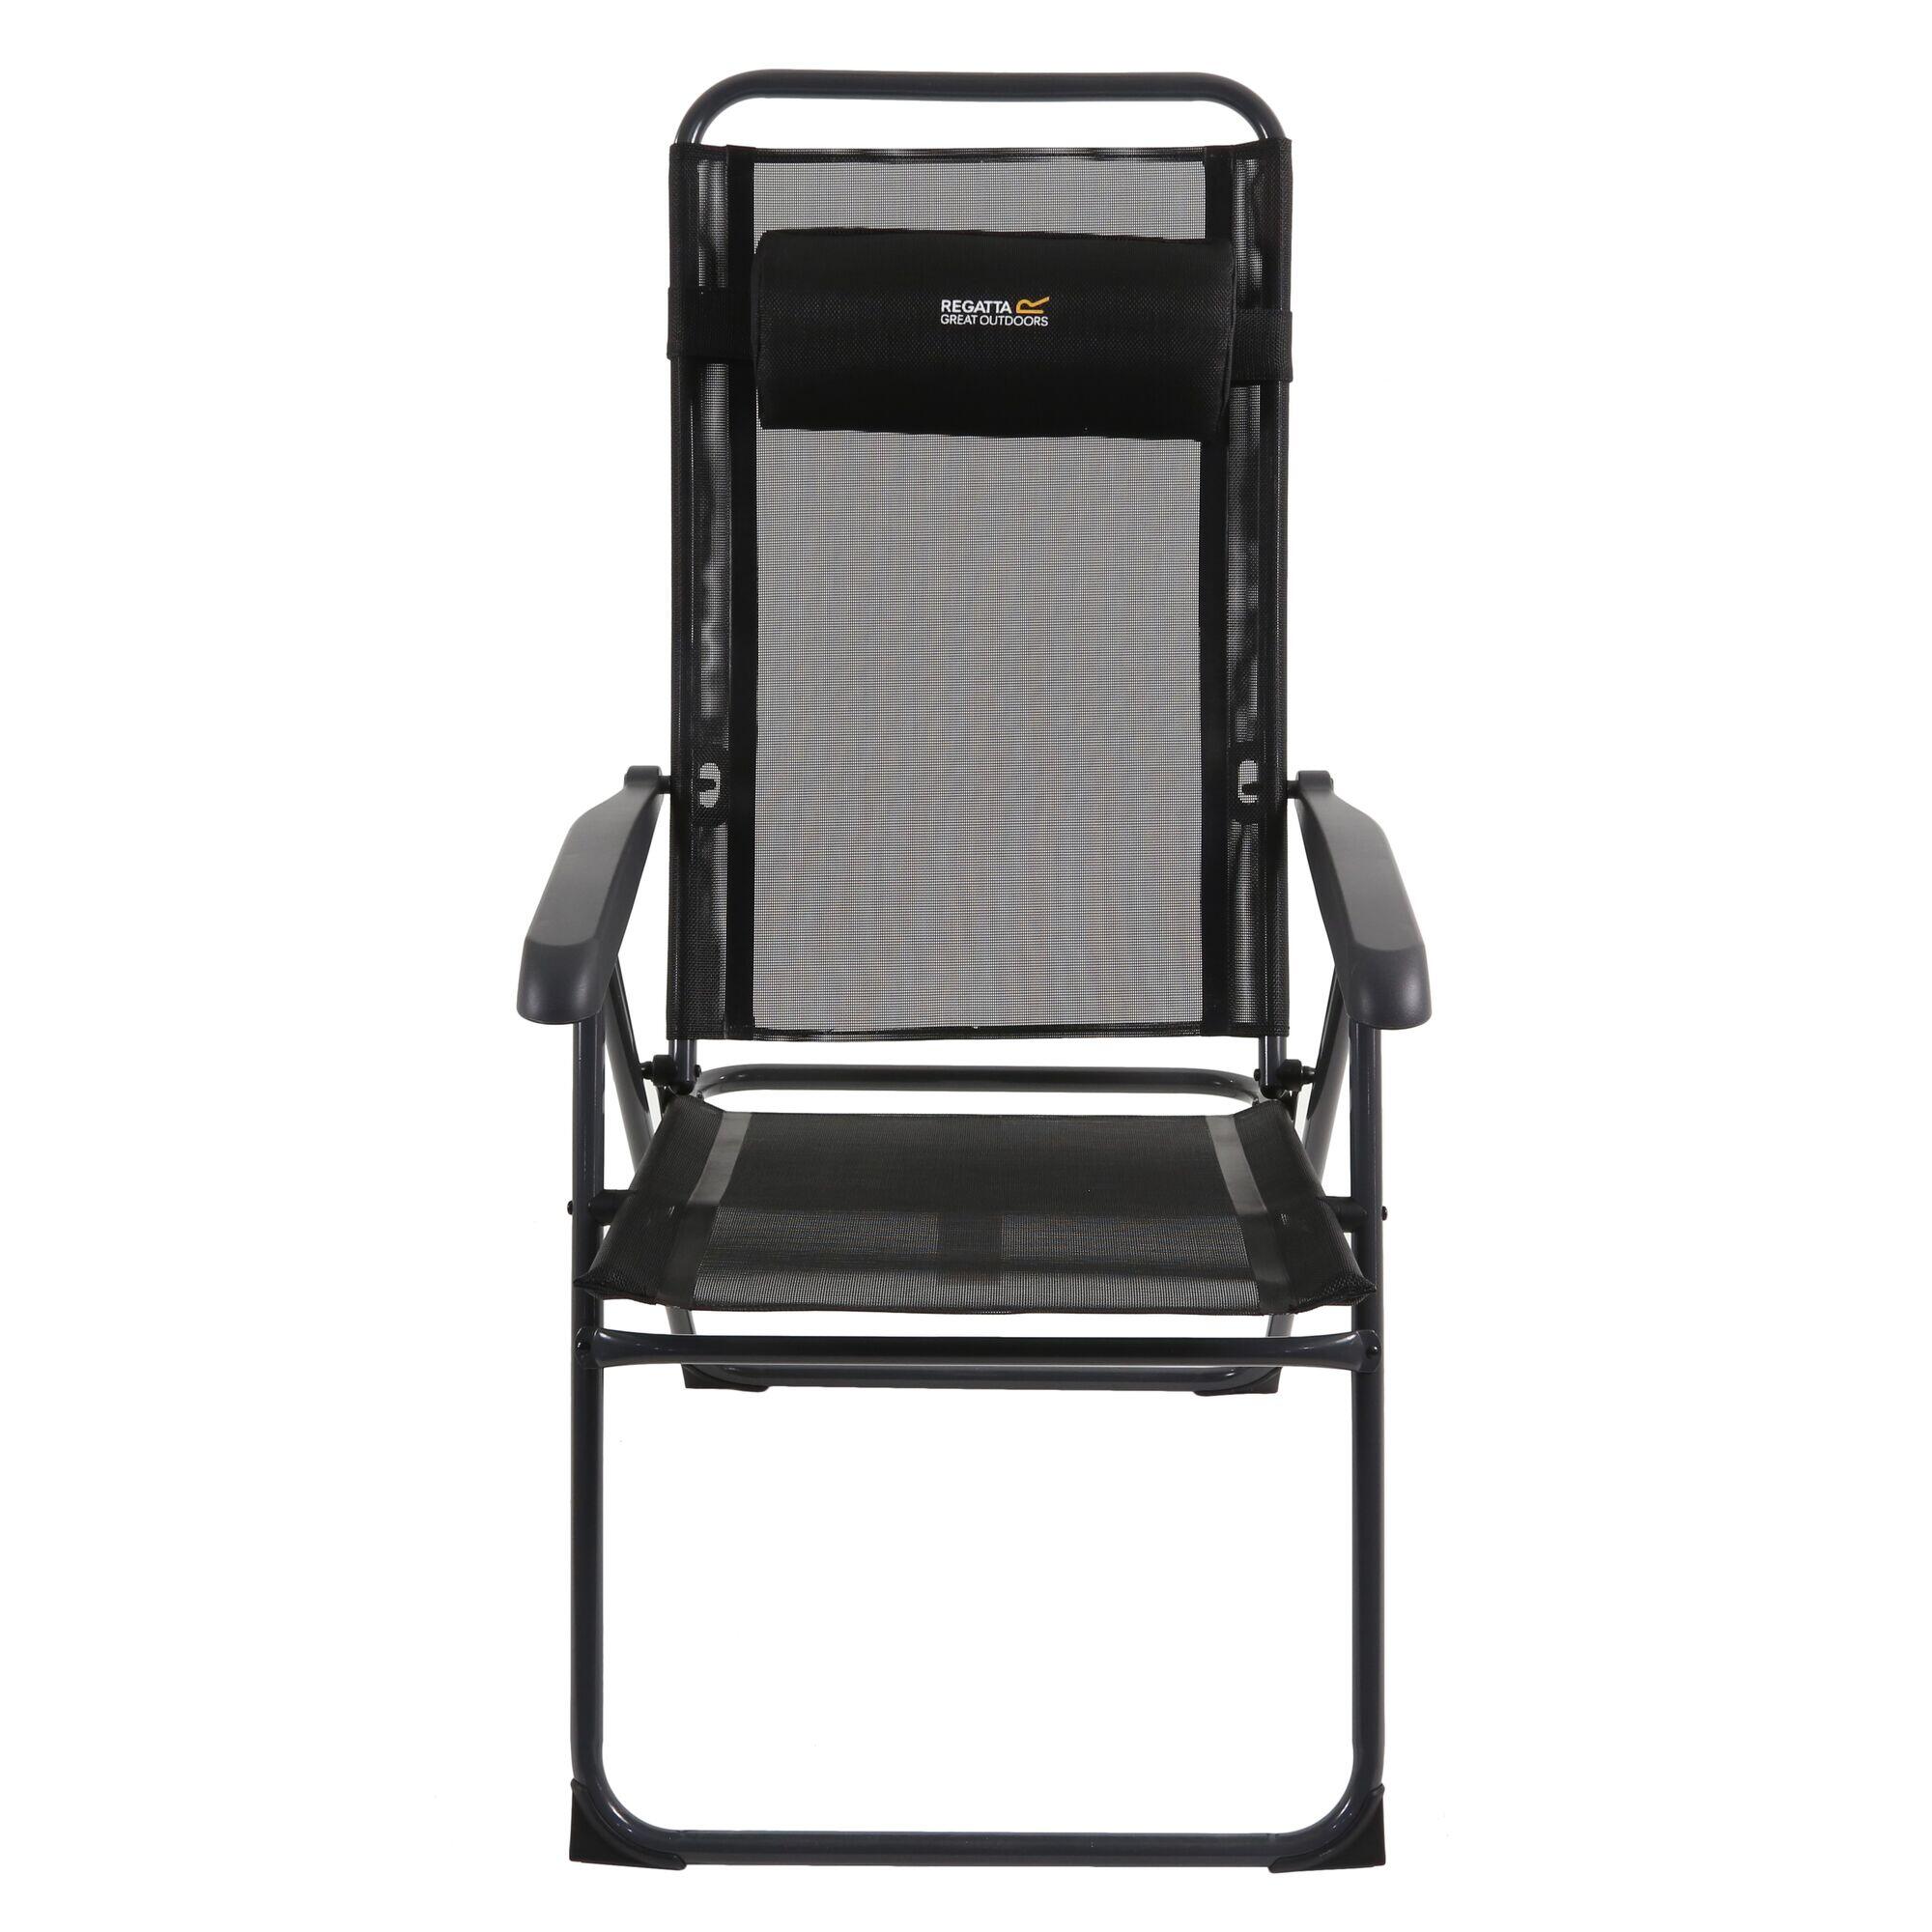 Colico Adults' Camping Chair - Black 4/5